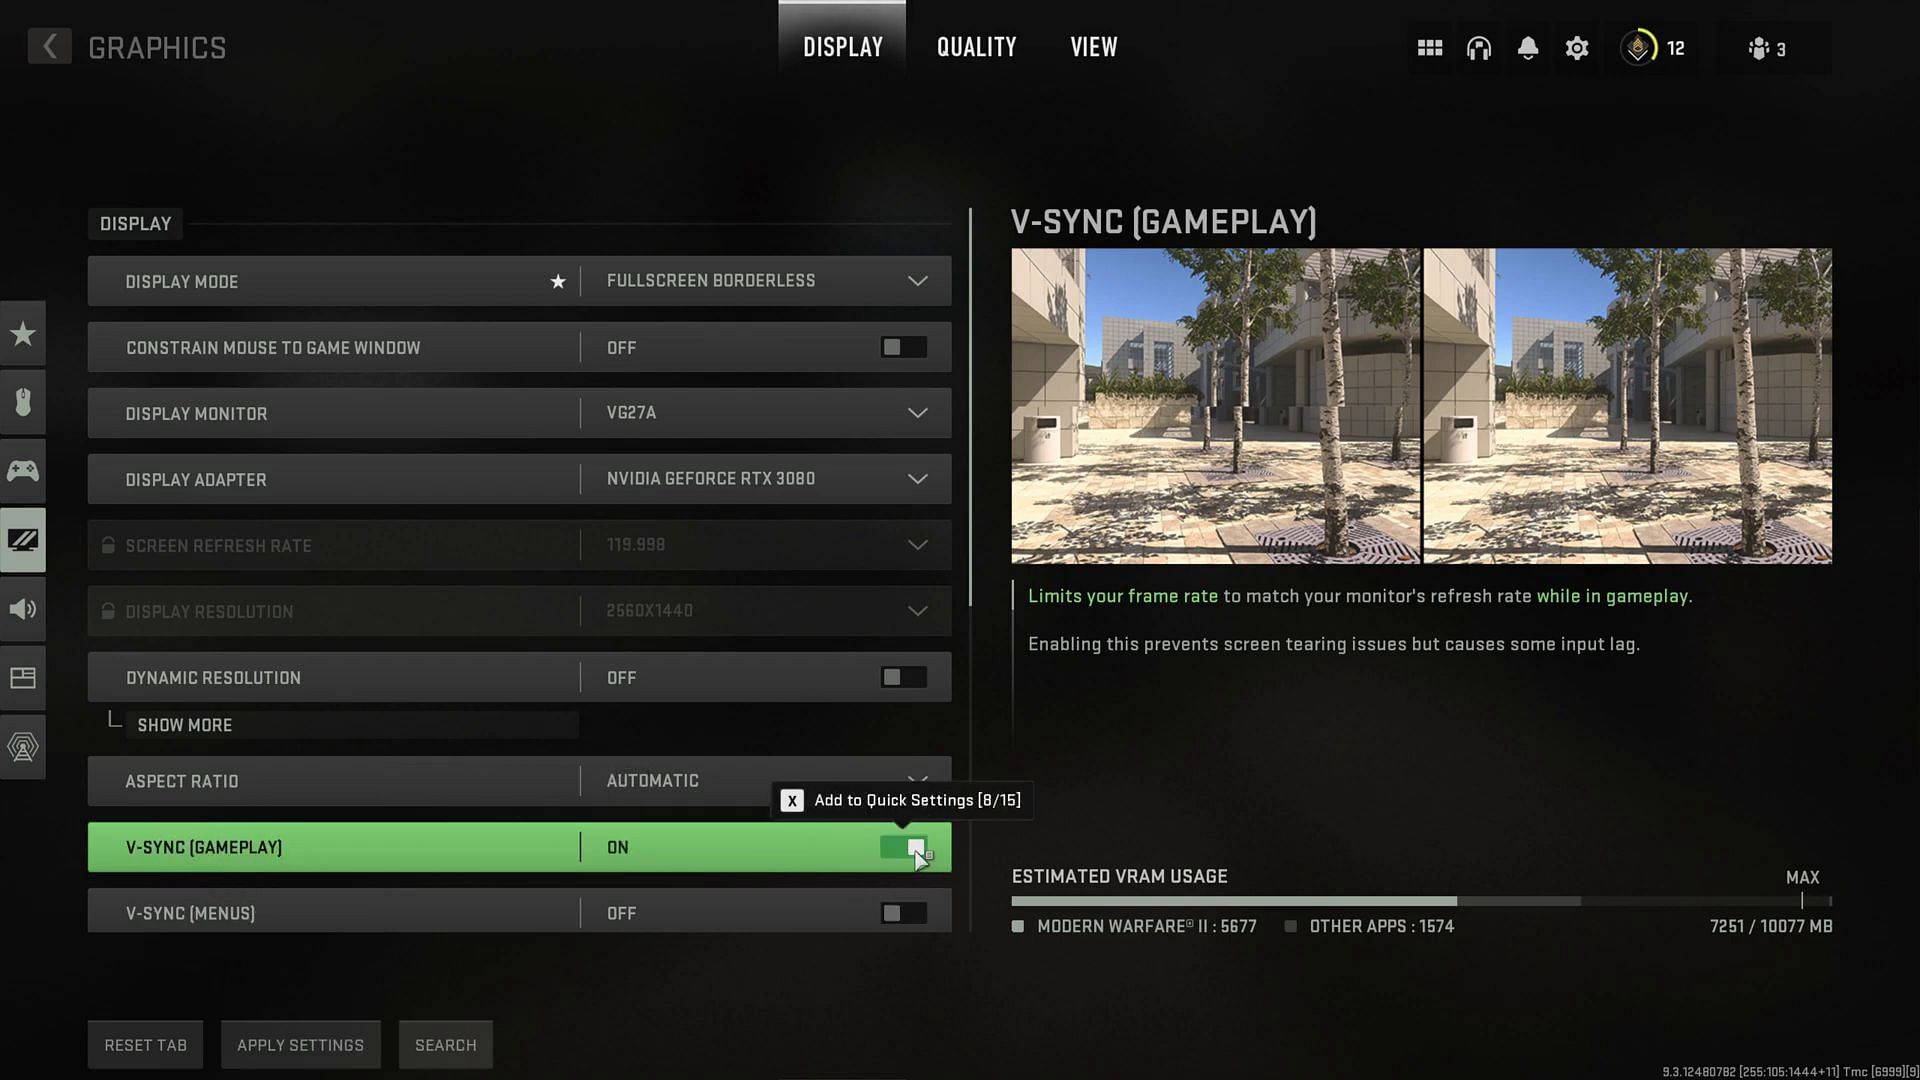 Turn on V-Sync in Graphic Settings (Image via Activision)